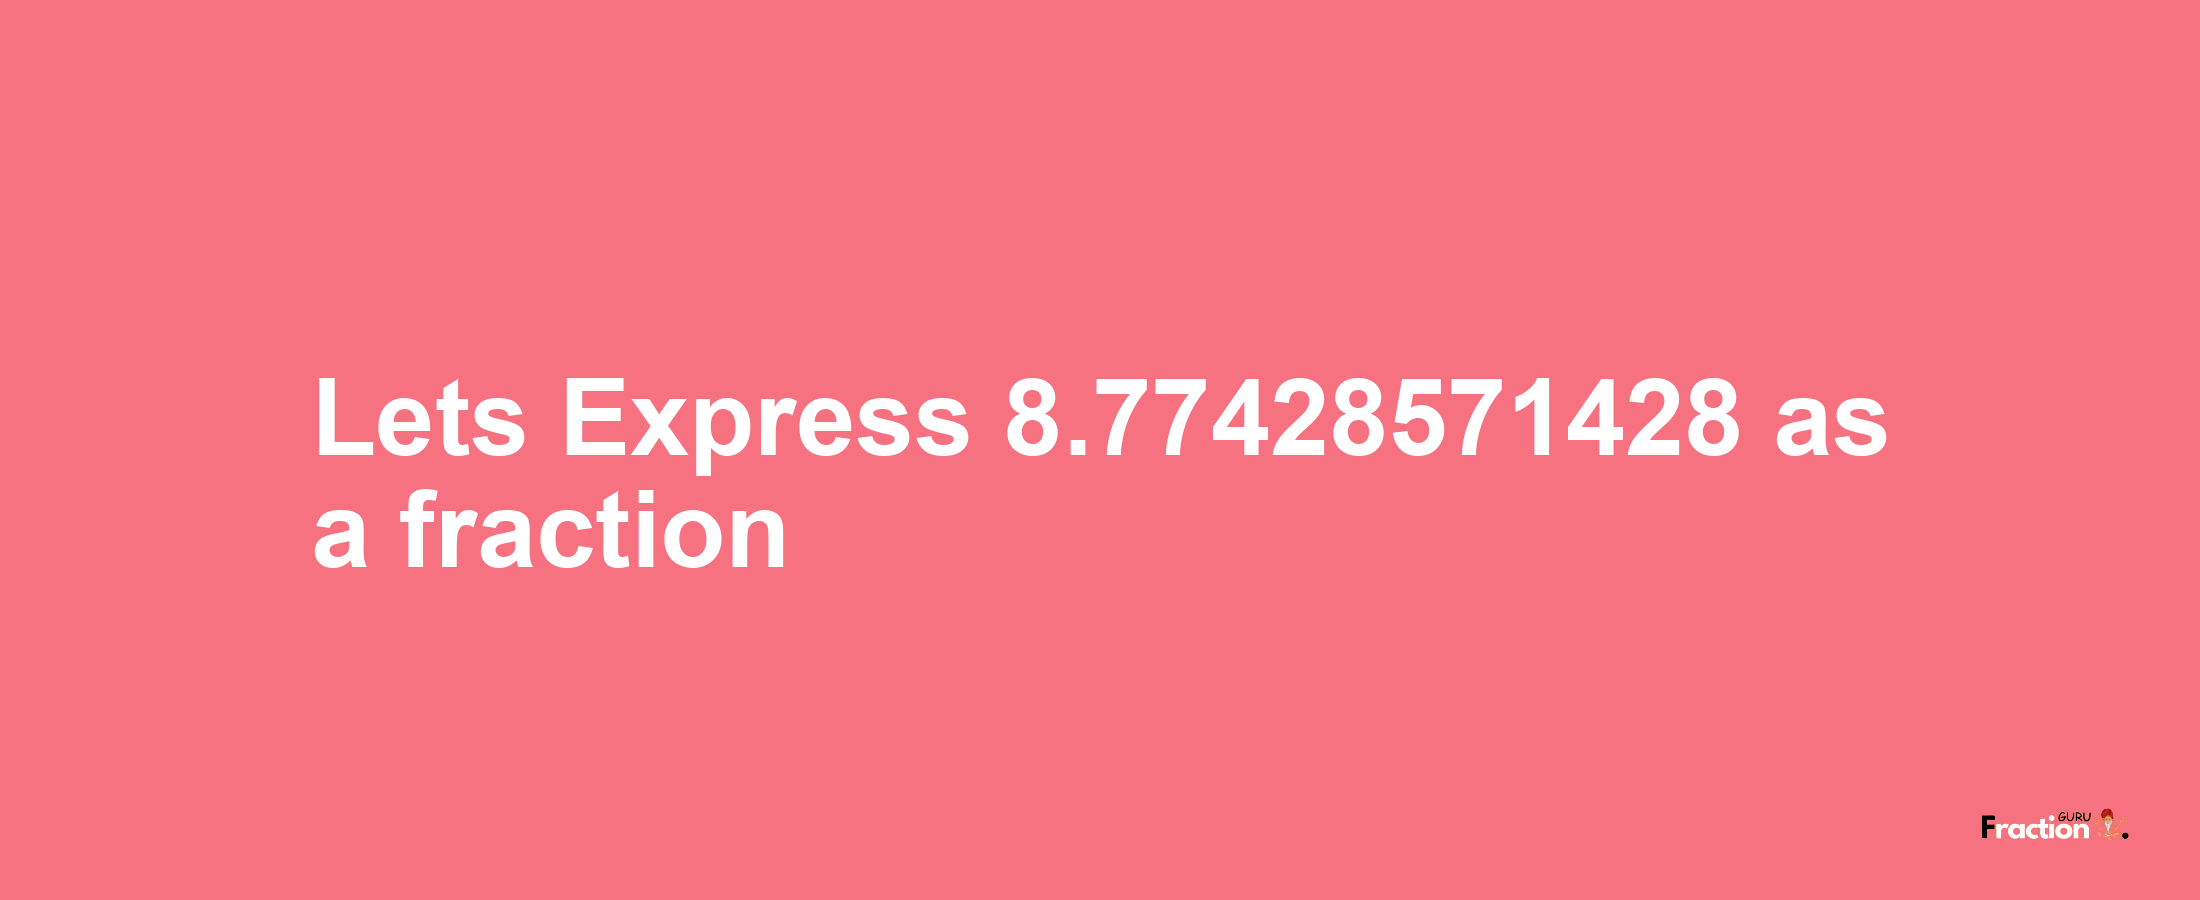 Lets Express 8.77428571428 as afraction